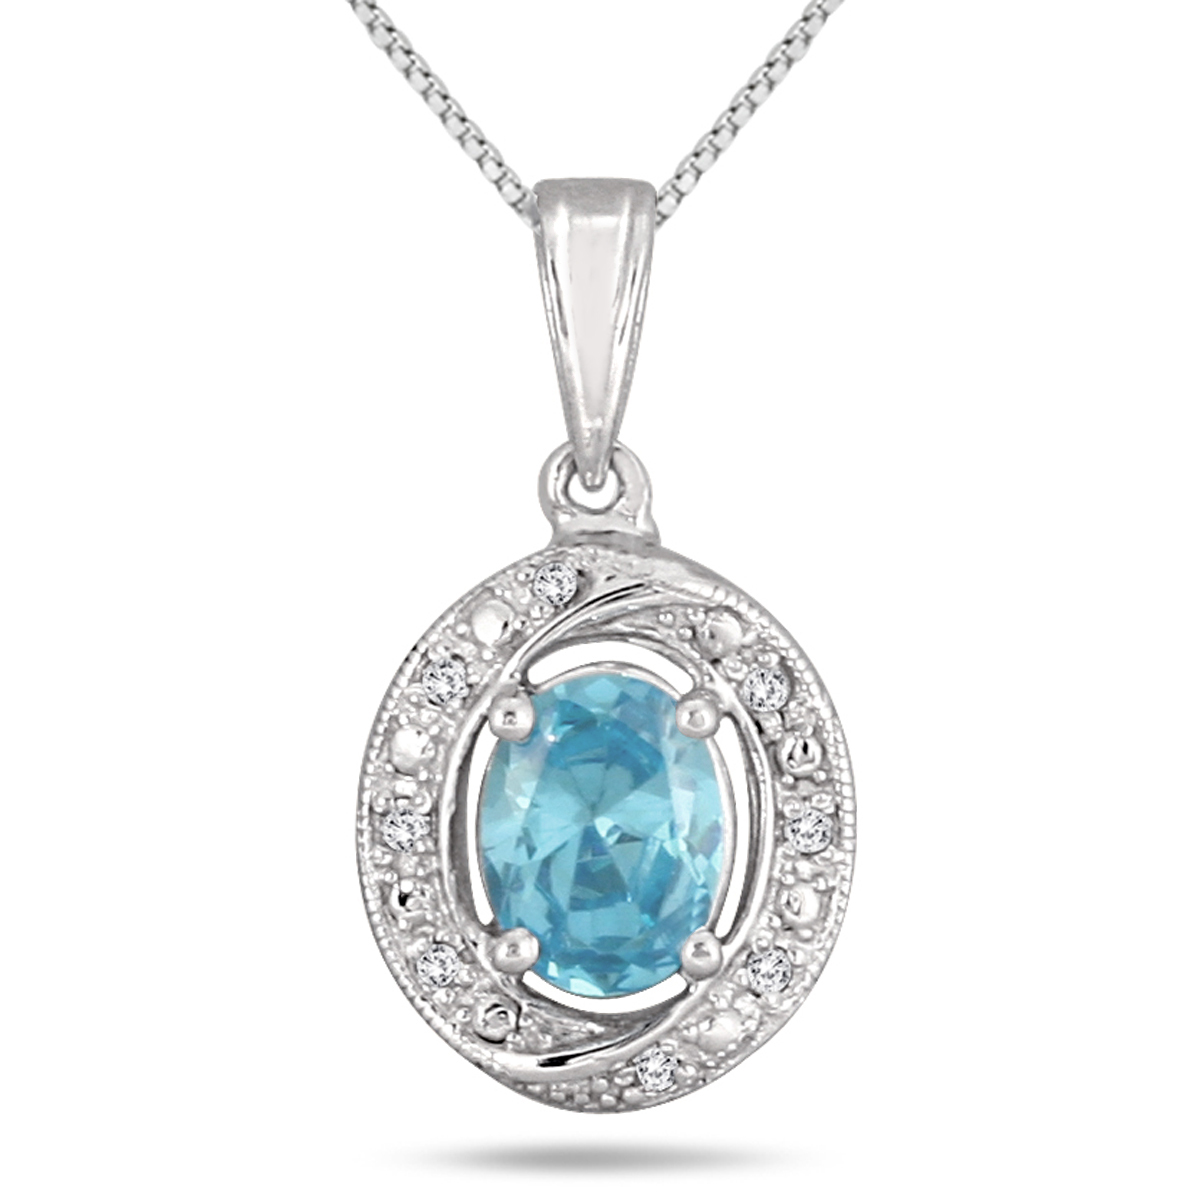 Blue Topaz and Diamond Royal Pendant in .925 Sterling Silver